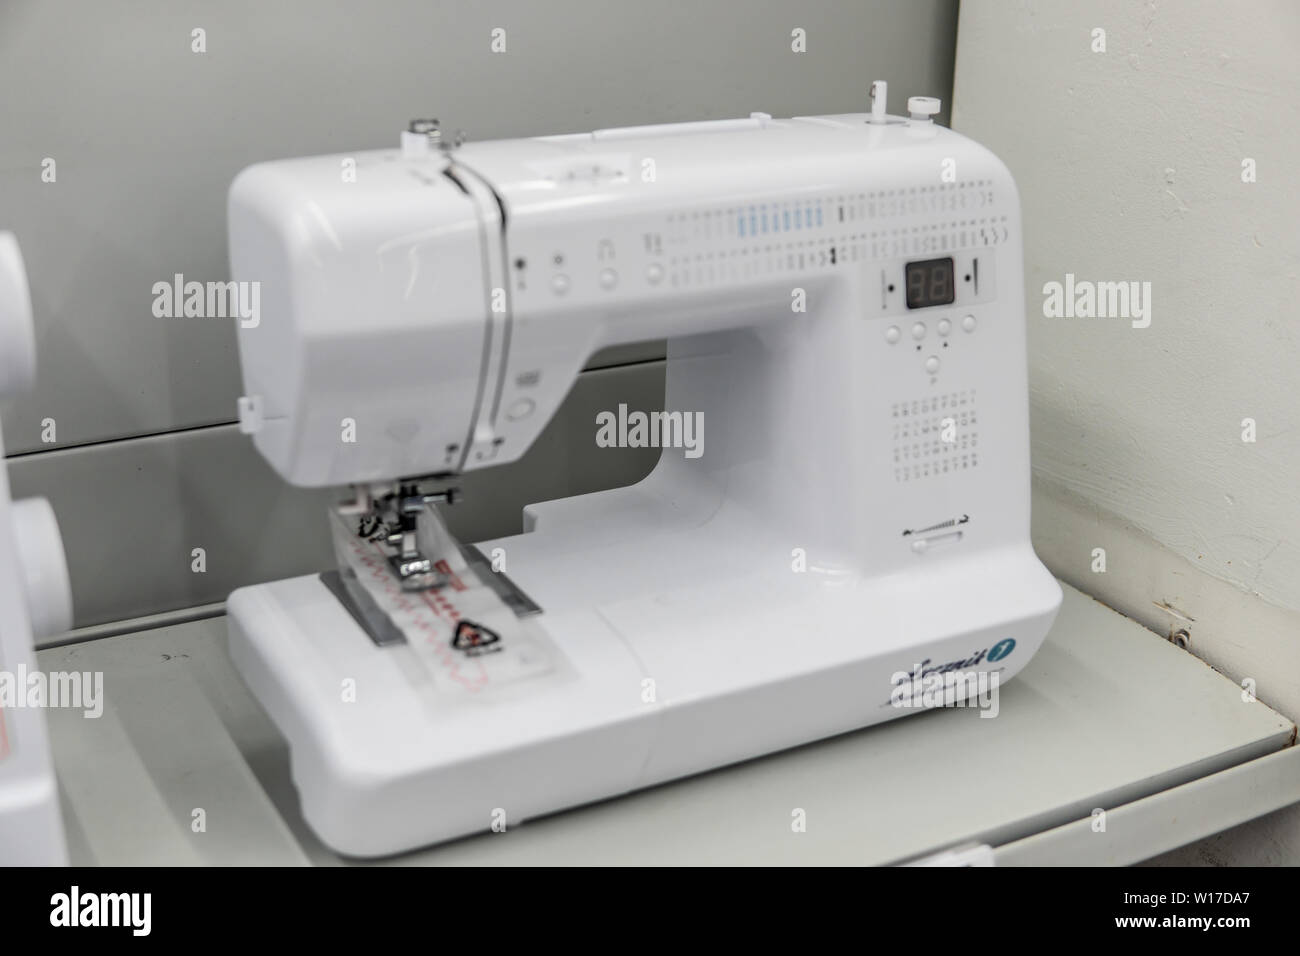 Lodz, Poland, July 9, 2018 inside Saturn electronic store, Sewing Machine  Lucznik on display for sale Stock Photo - Alamy